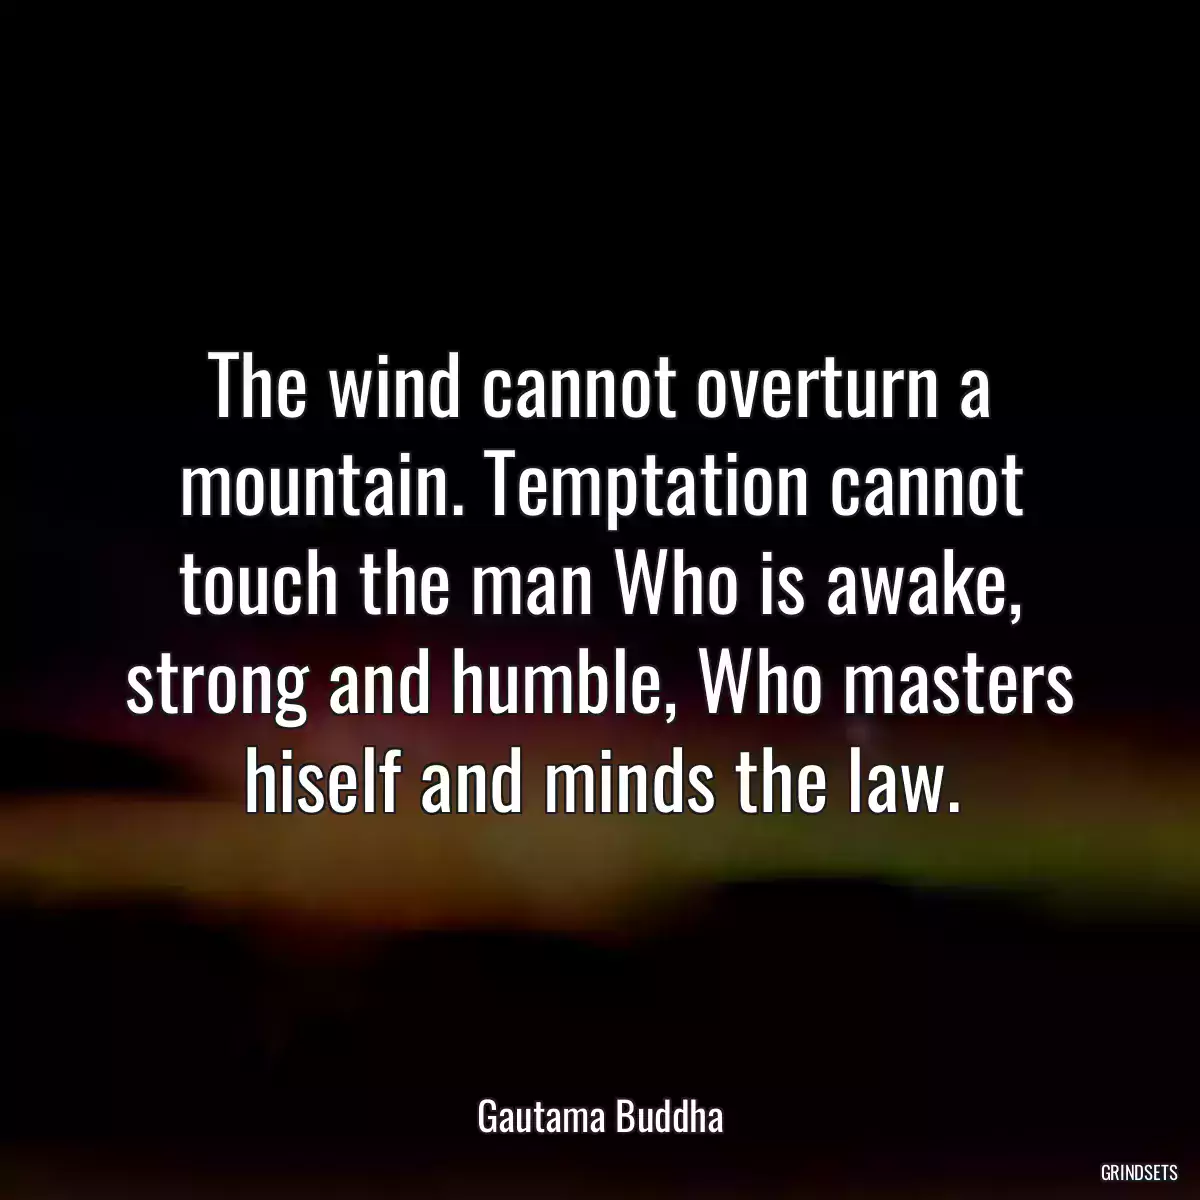 The wind cannot overturn a mountain. Temptation cannot touch the man Who is awake, strong and humble, Who masters hiself and minds the law.